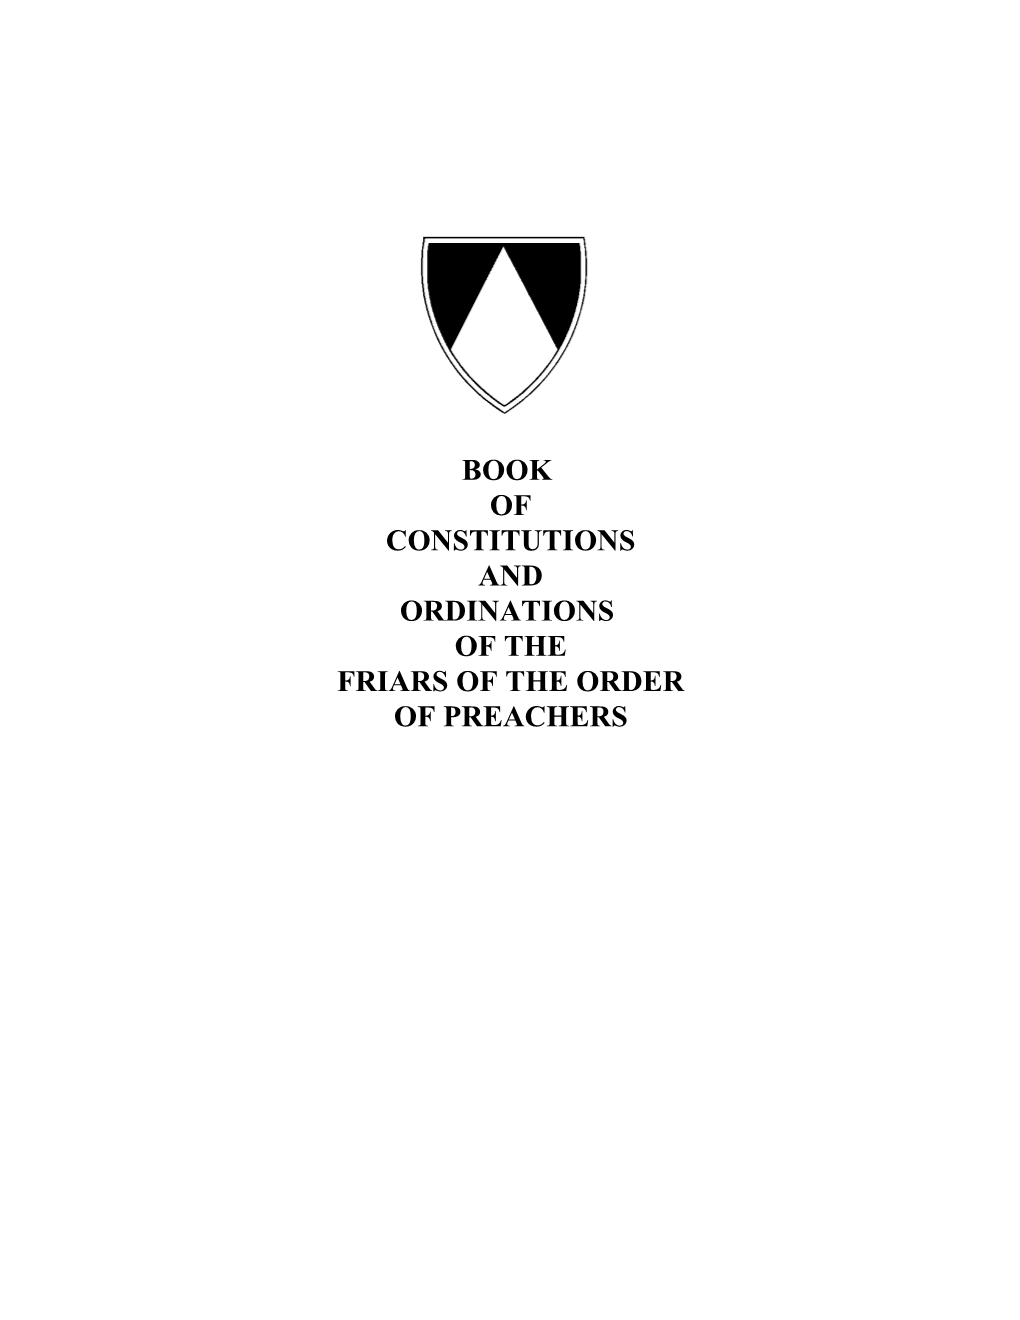 Book of Constitutions and Ordinations of the Friars of the Order of Preachers 1